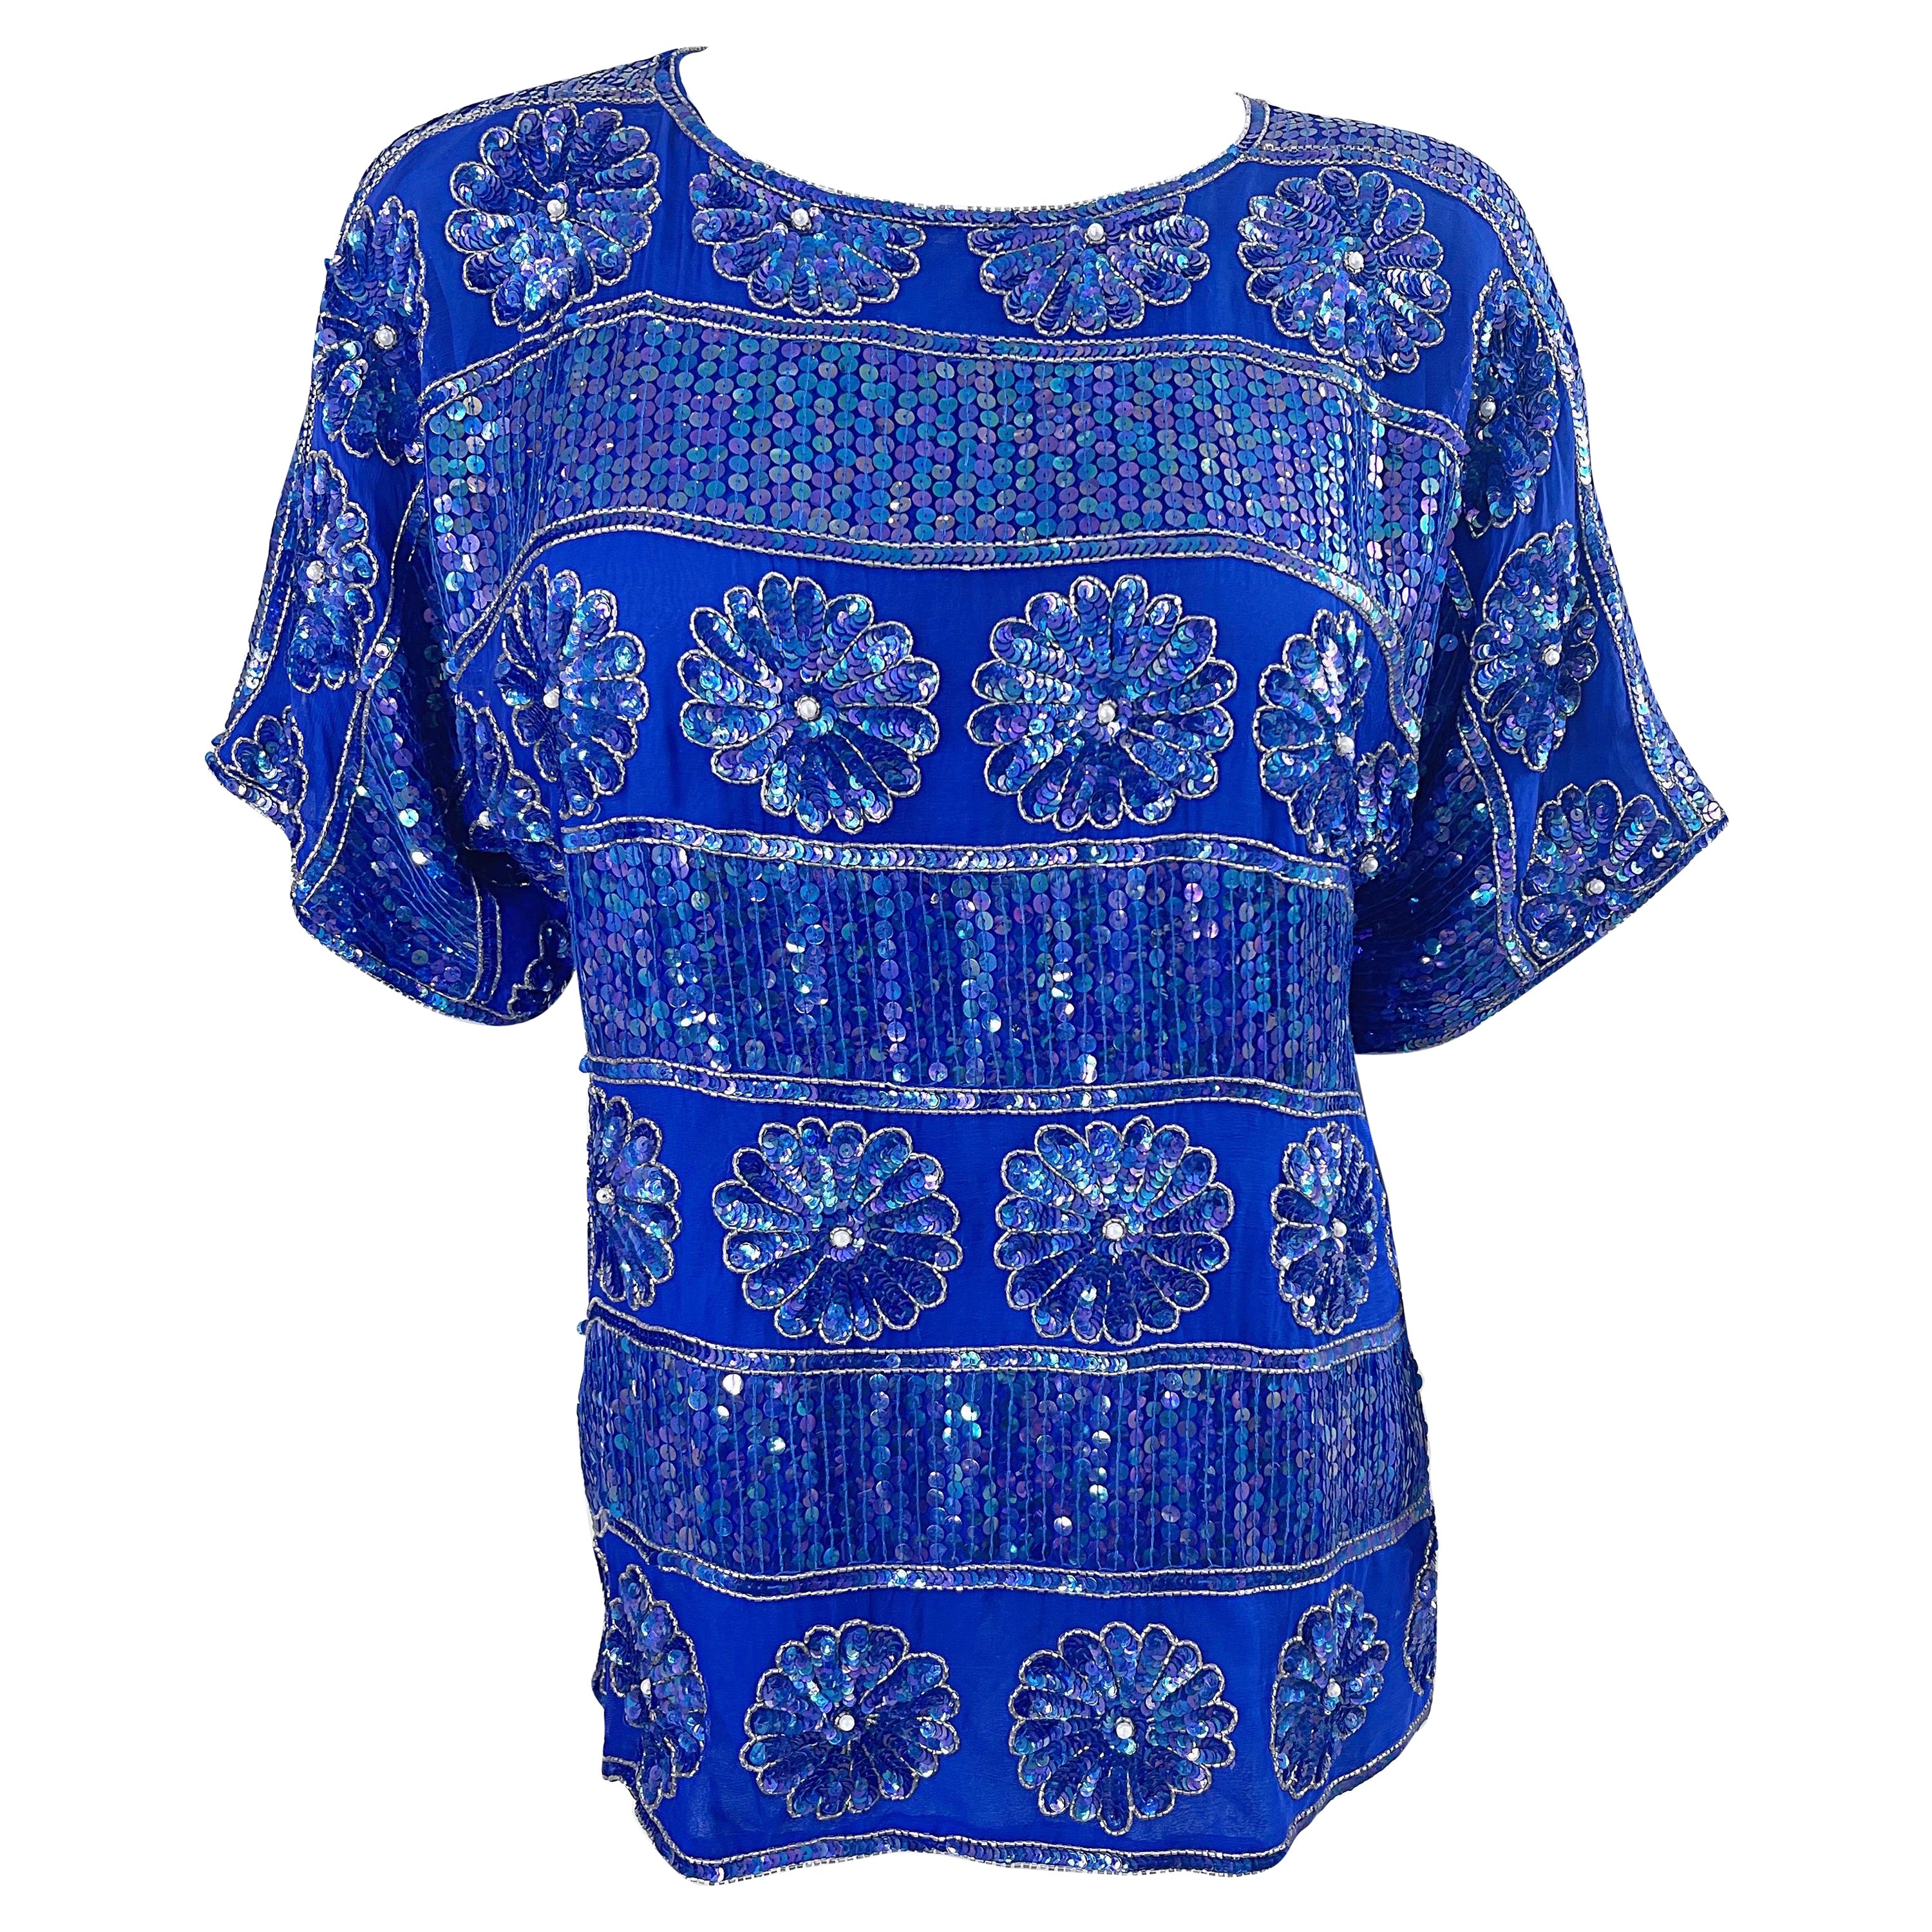 1980s Royal Blue Silk Chiffon Sequin Beaded Pearl Vintage 80s Blouse Shirt Top For Sale